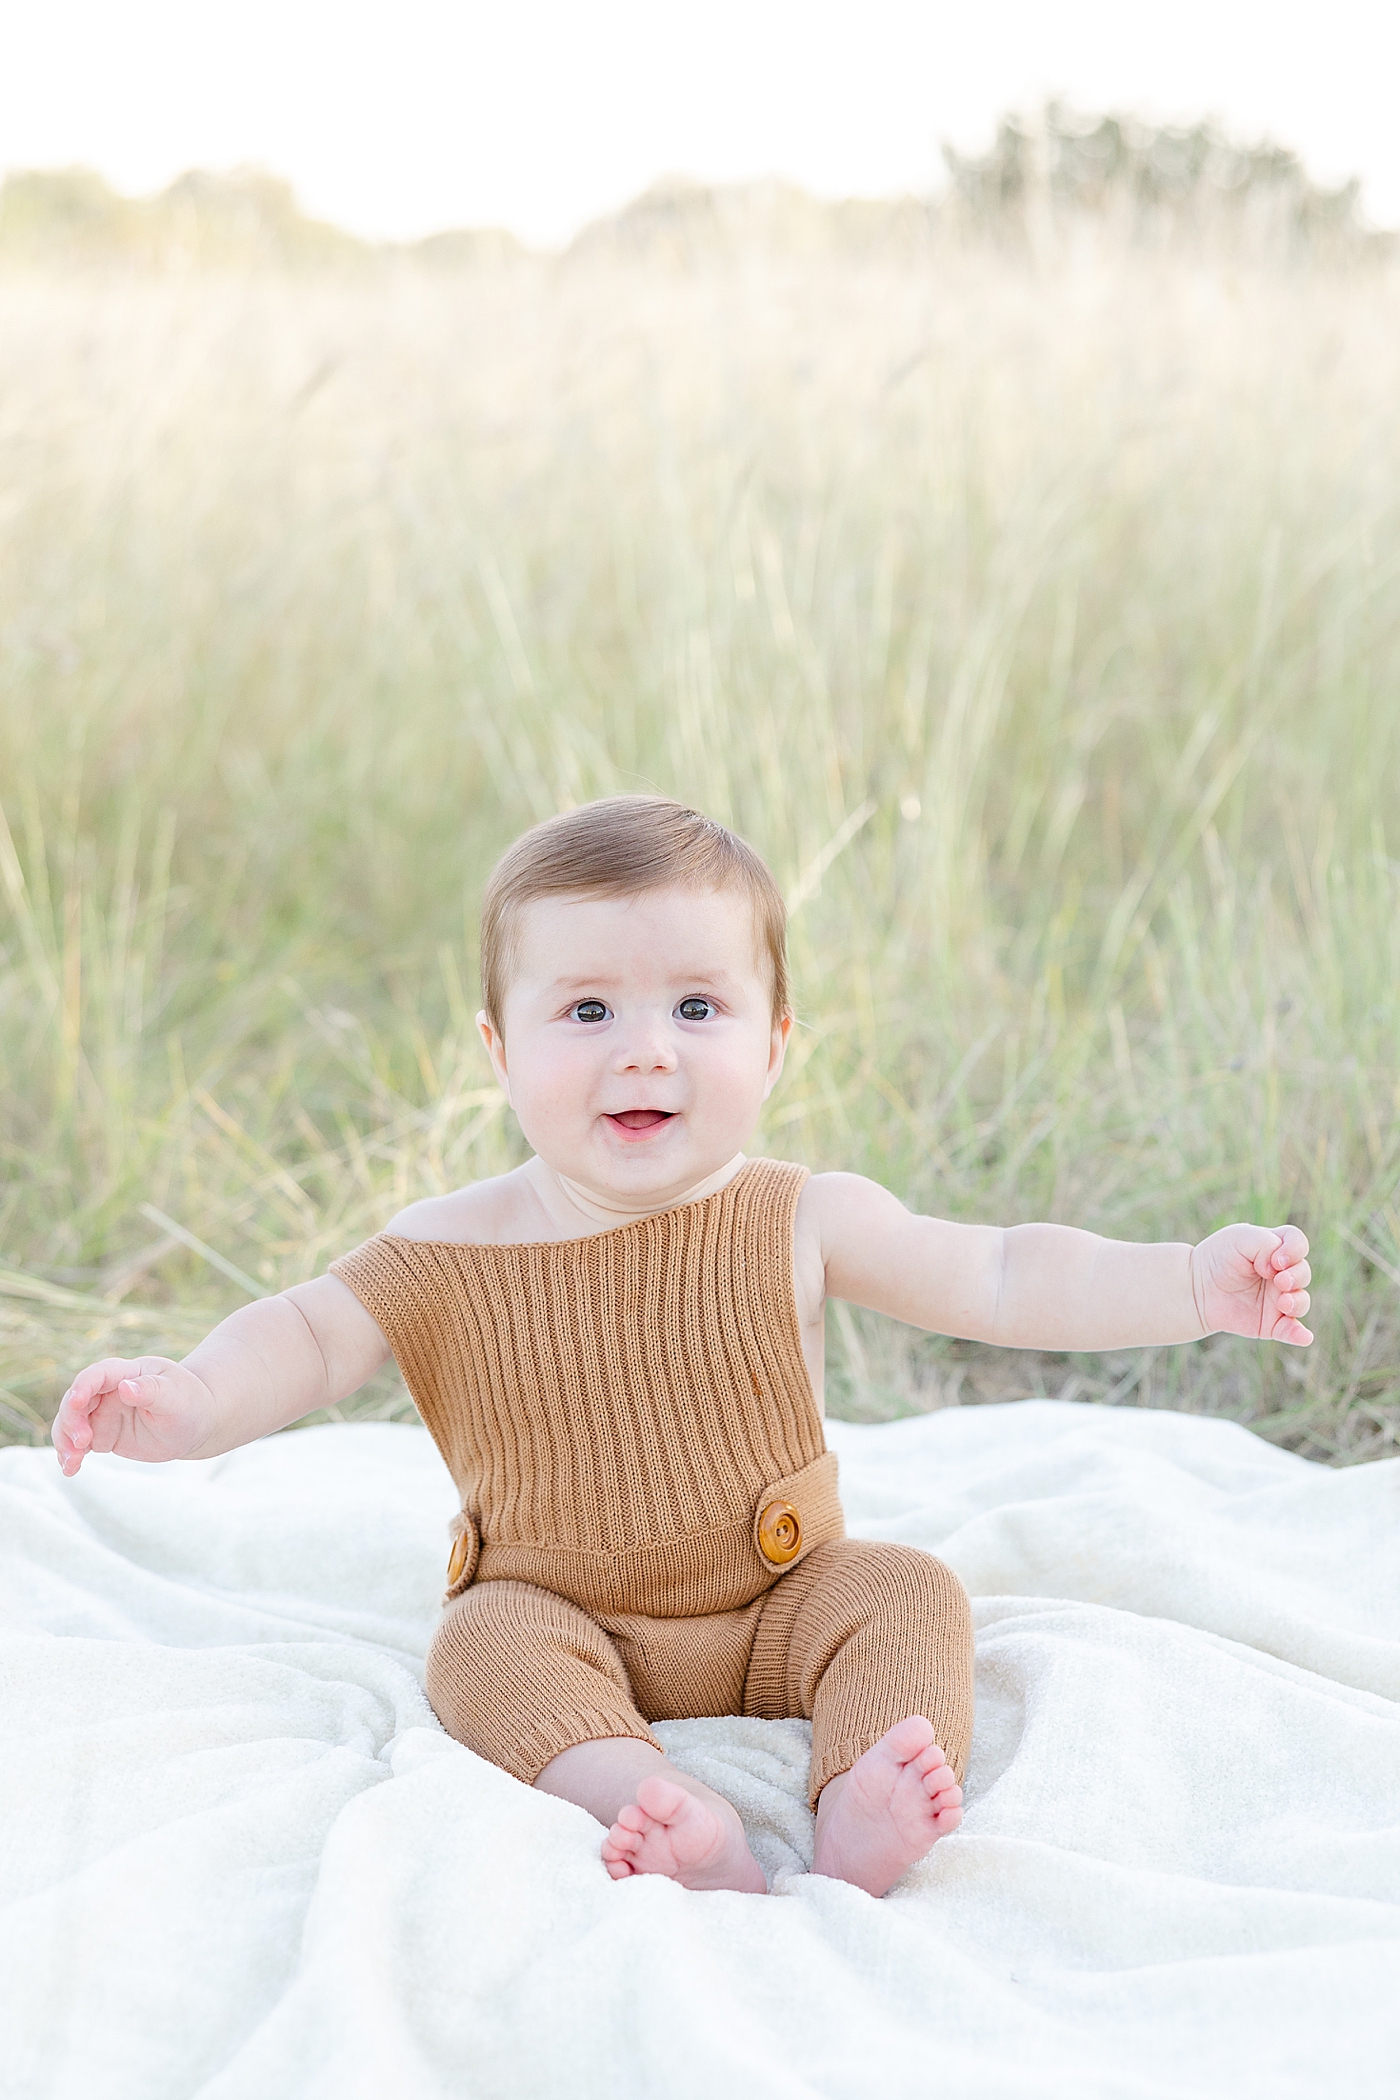 Baby boy in brown smiling | Image by Sana Ahmed Photography